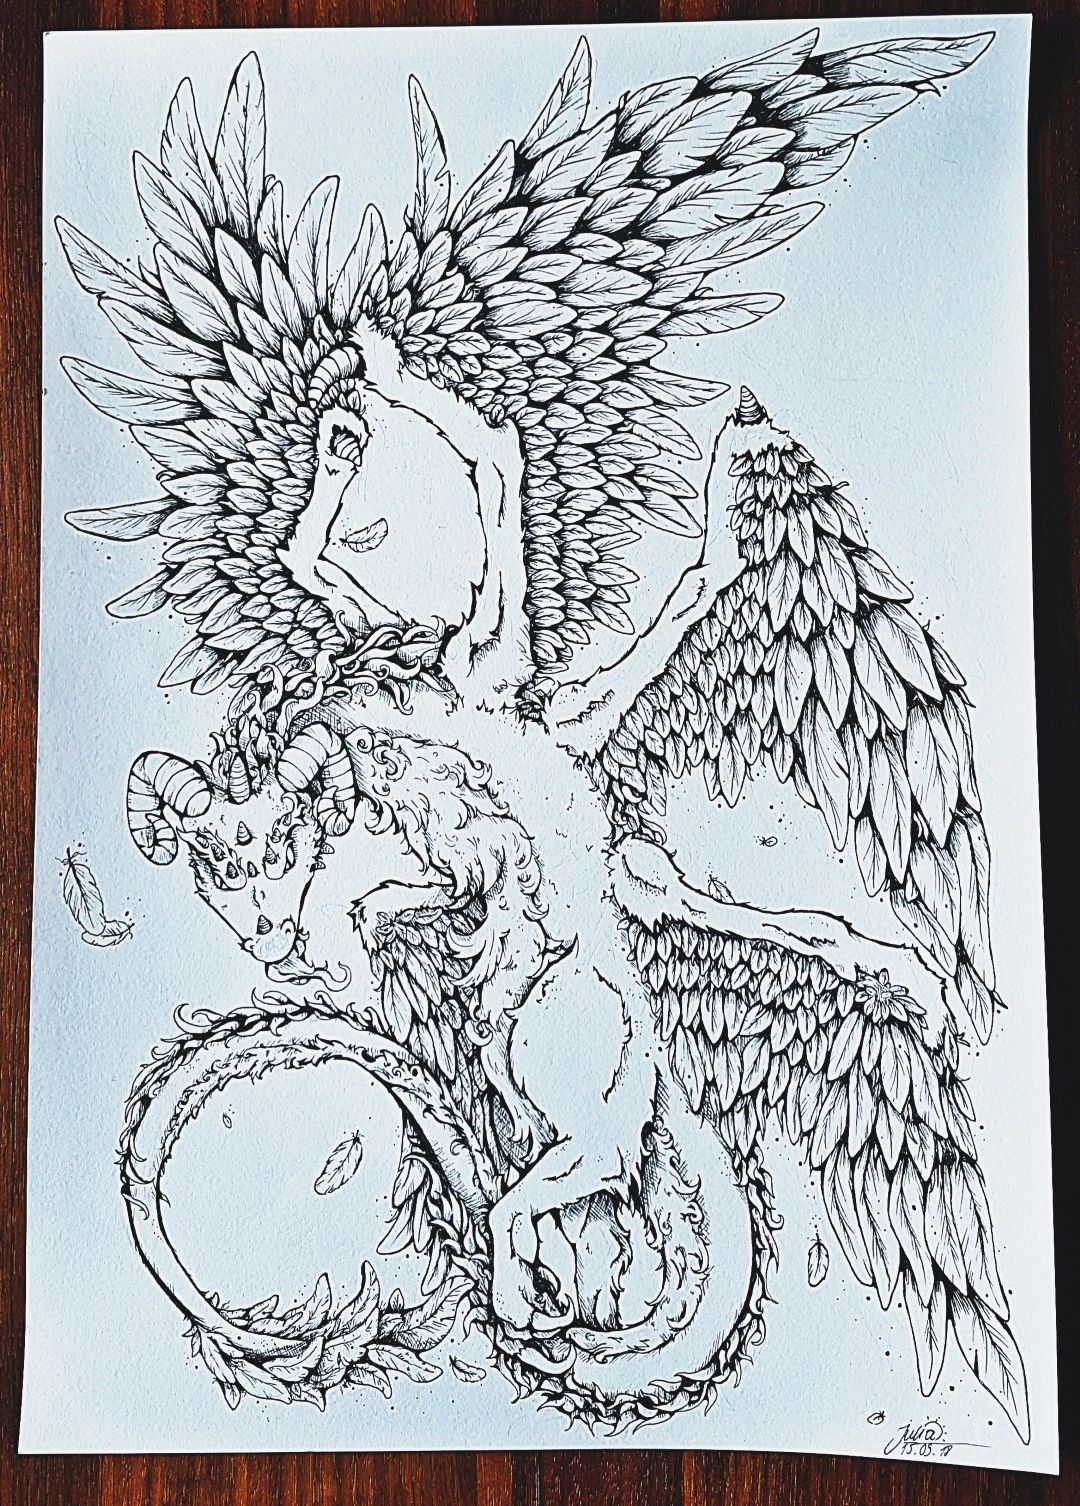 Fineline drawing of a feathered dragon